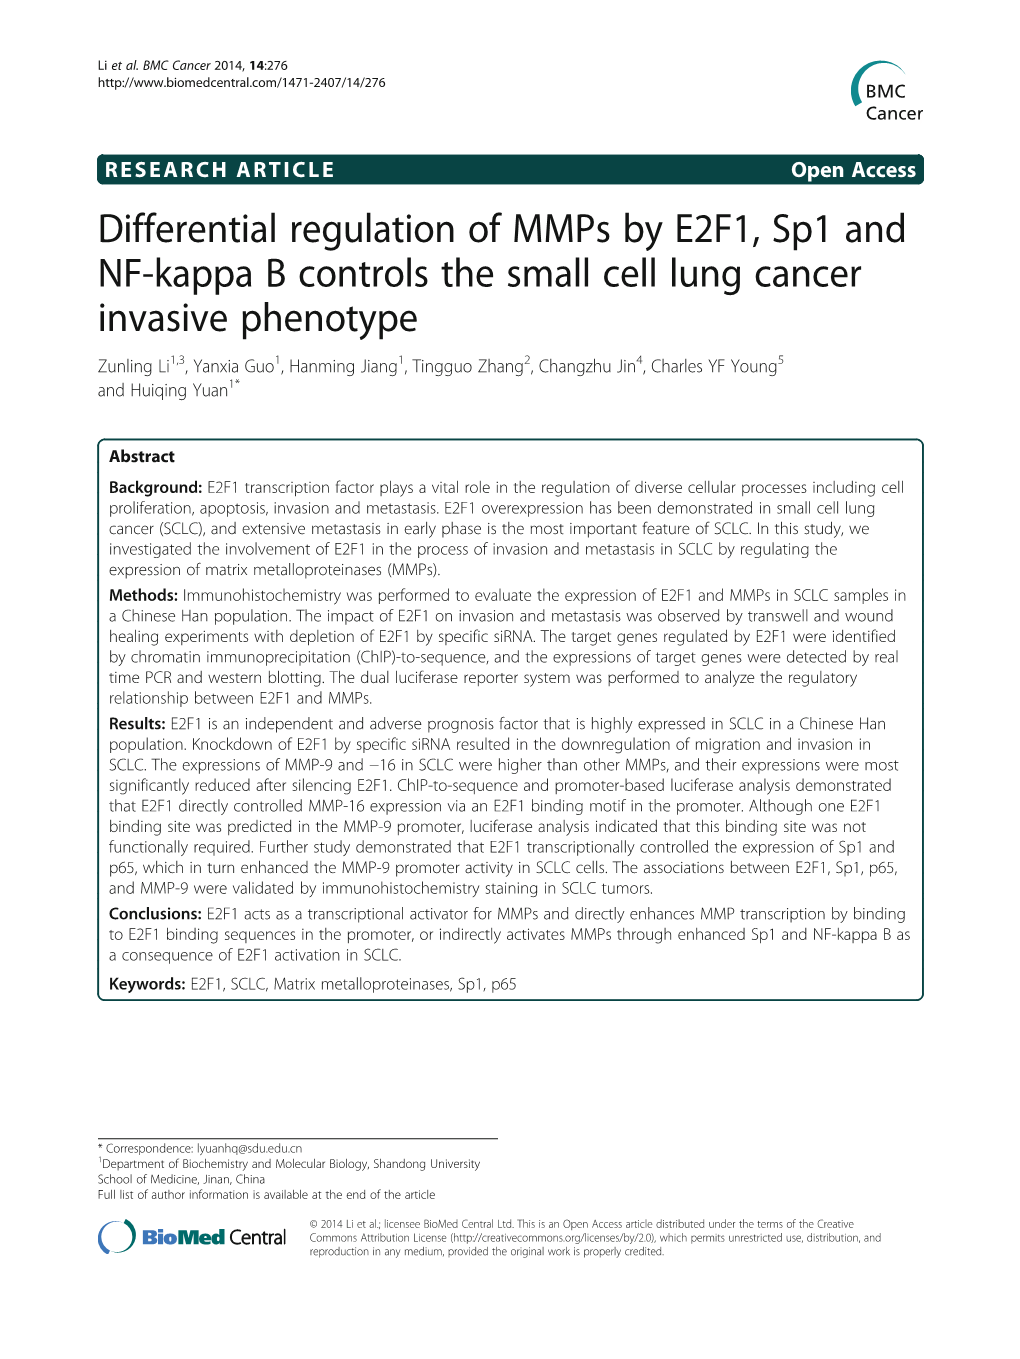 Differential Regulation of Mmps by E2F1, Sp1 and NF-Kappa B Controls